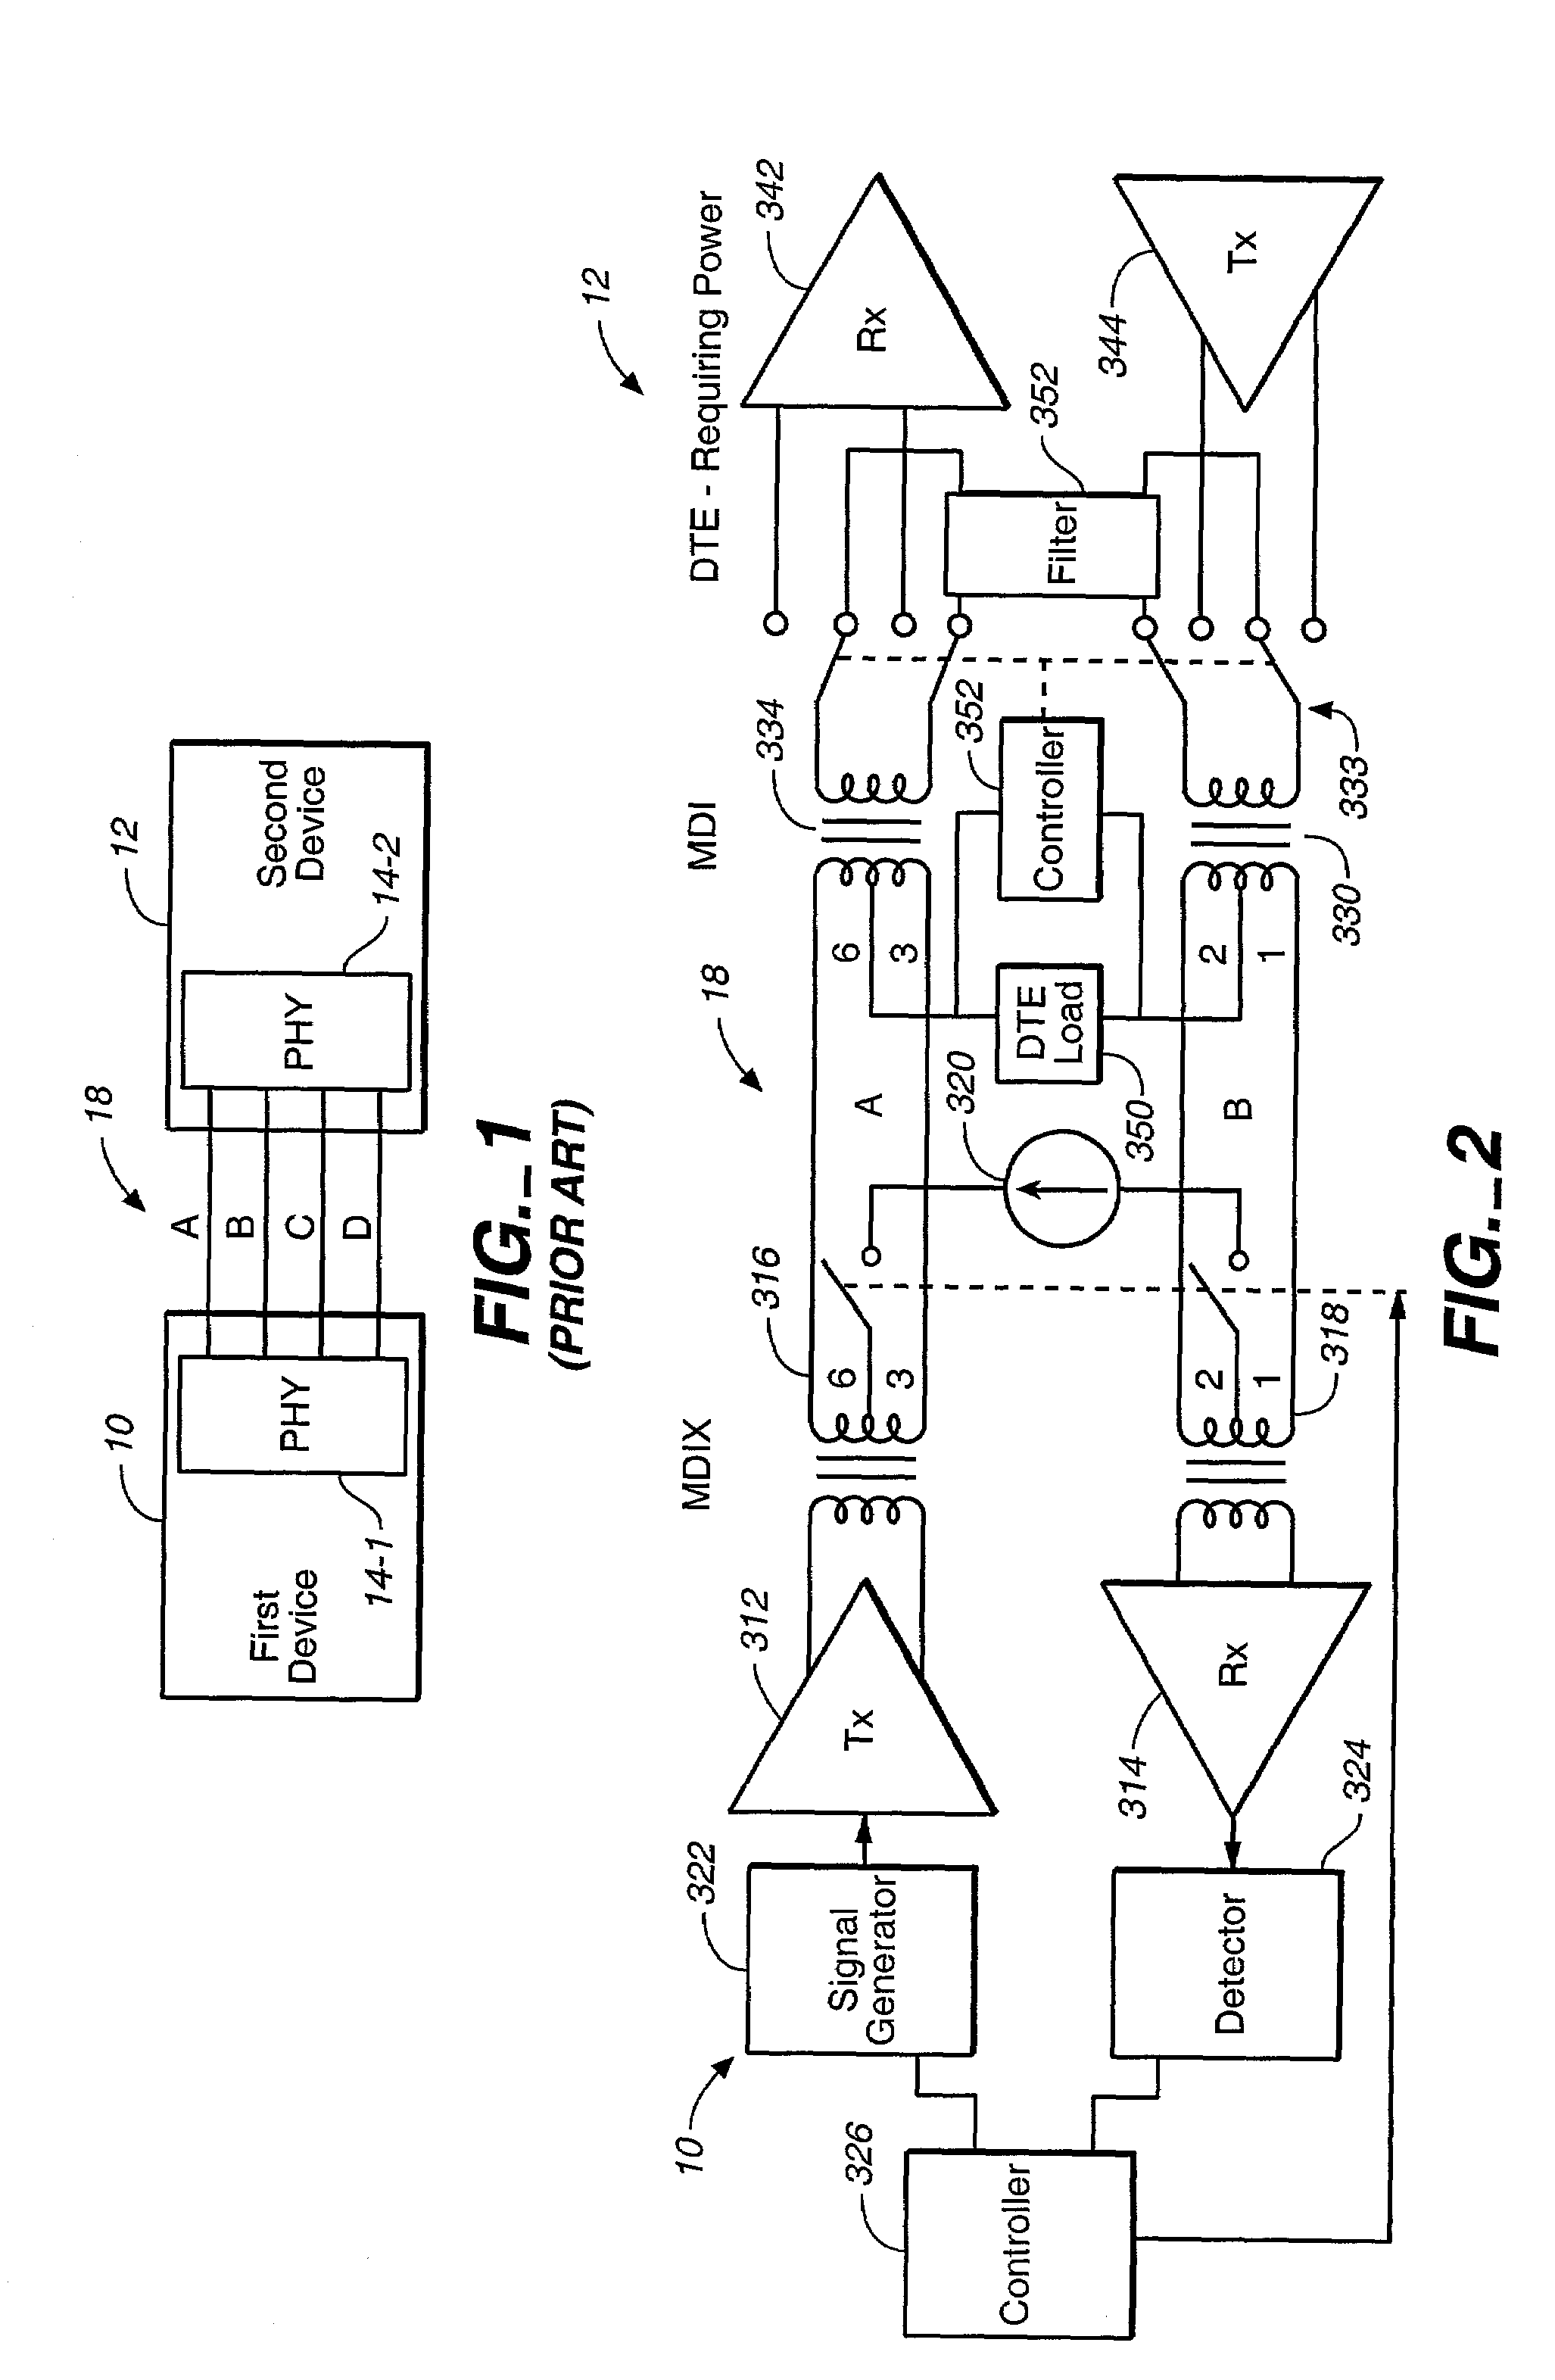 Method and apparatus for autonegotiation between network devices